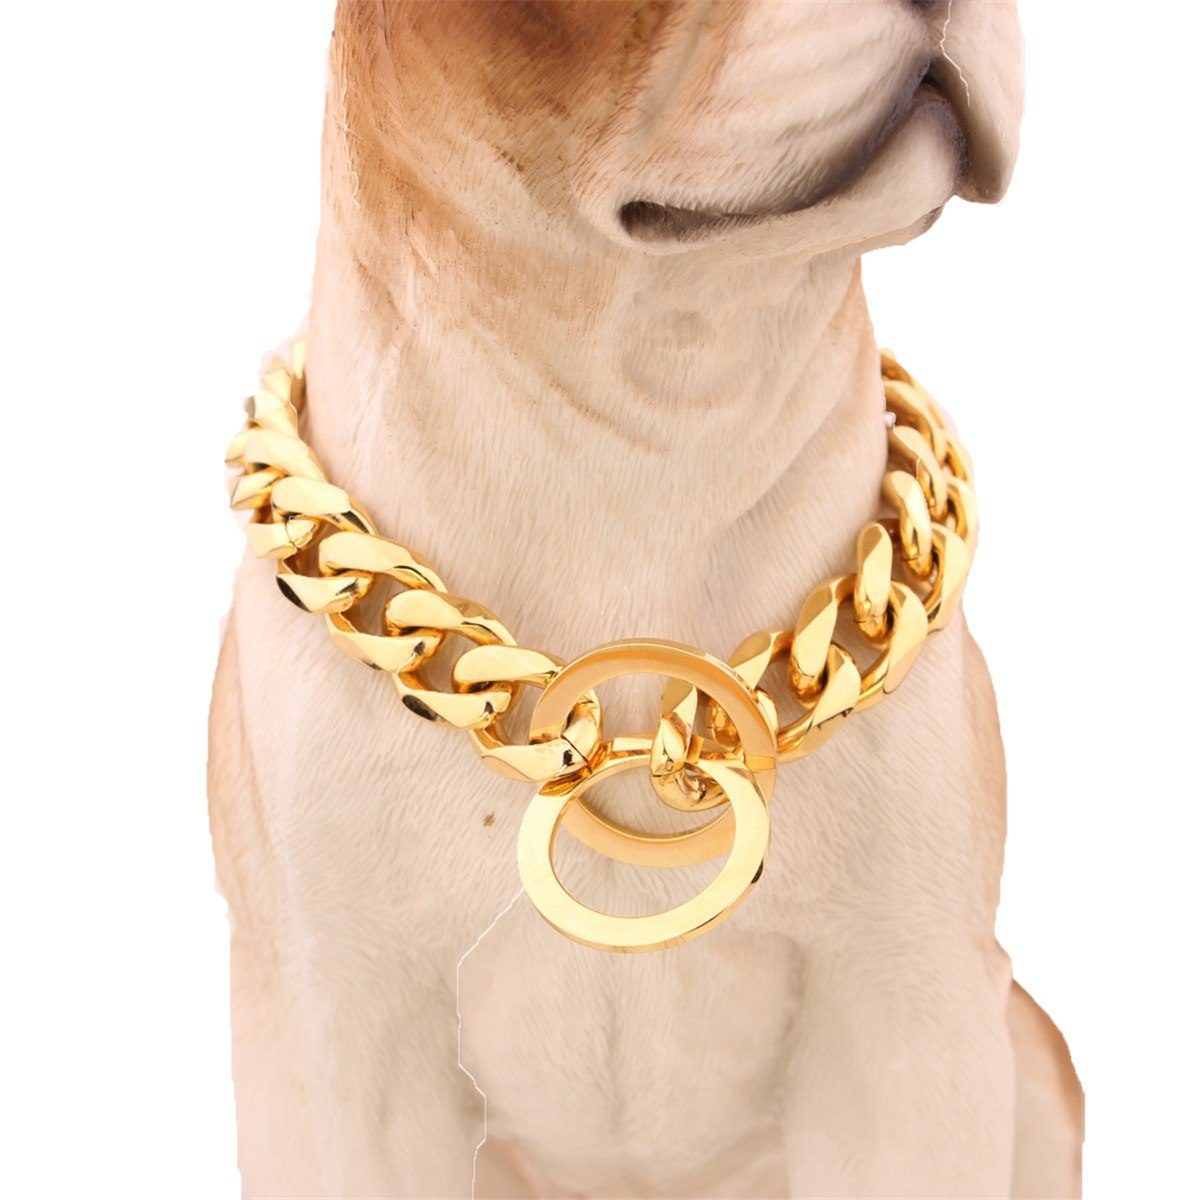 14-26" Dog Gold Chain Collar 13mm Wide Tone Material: Stainless steel